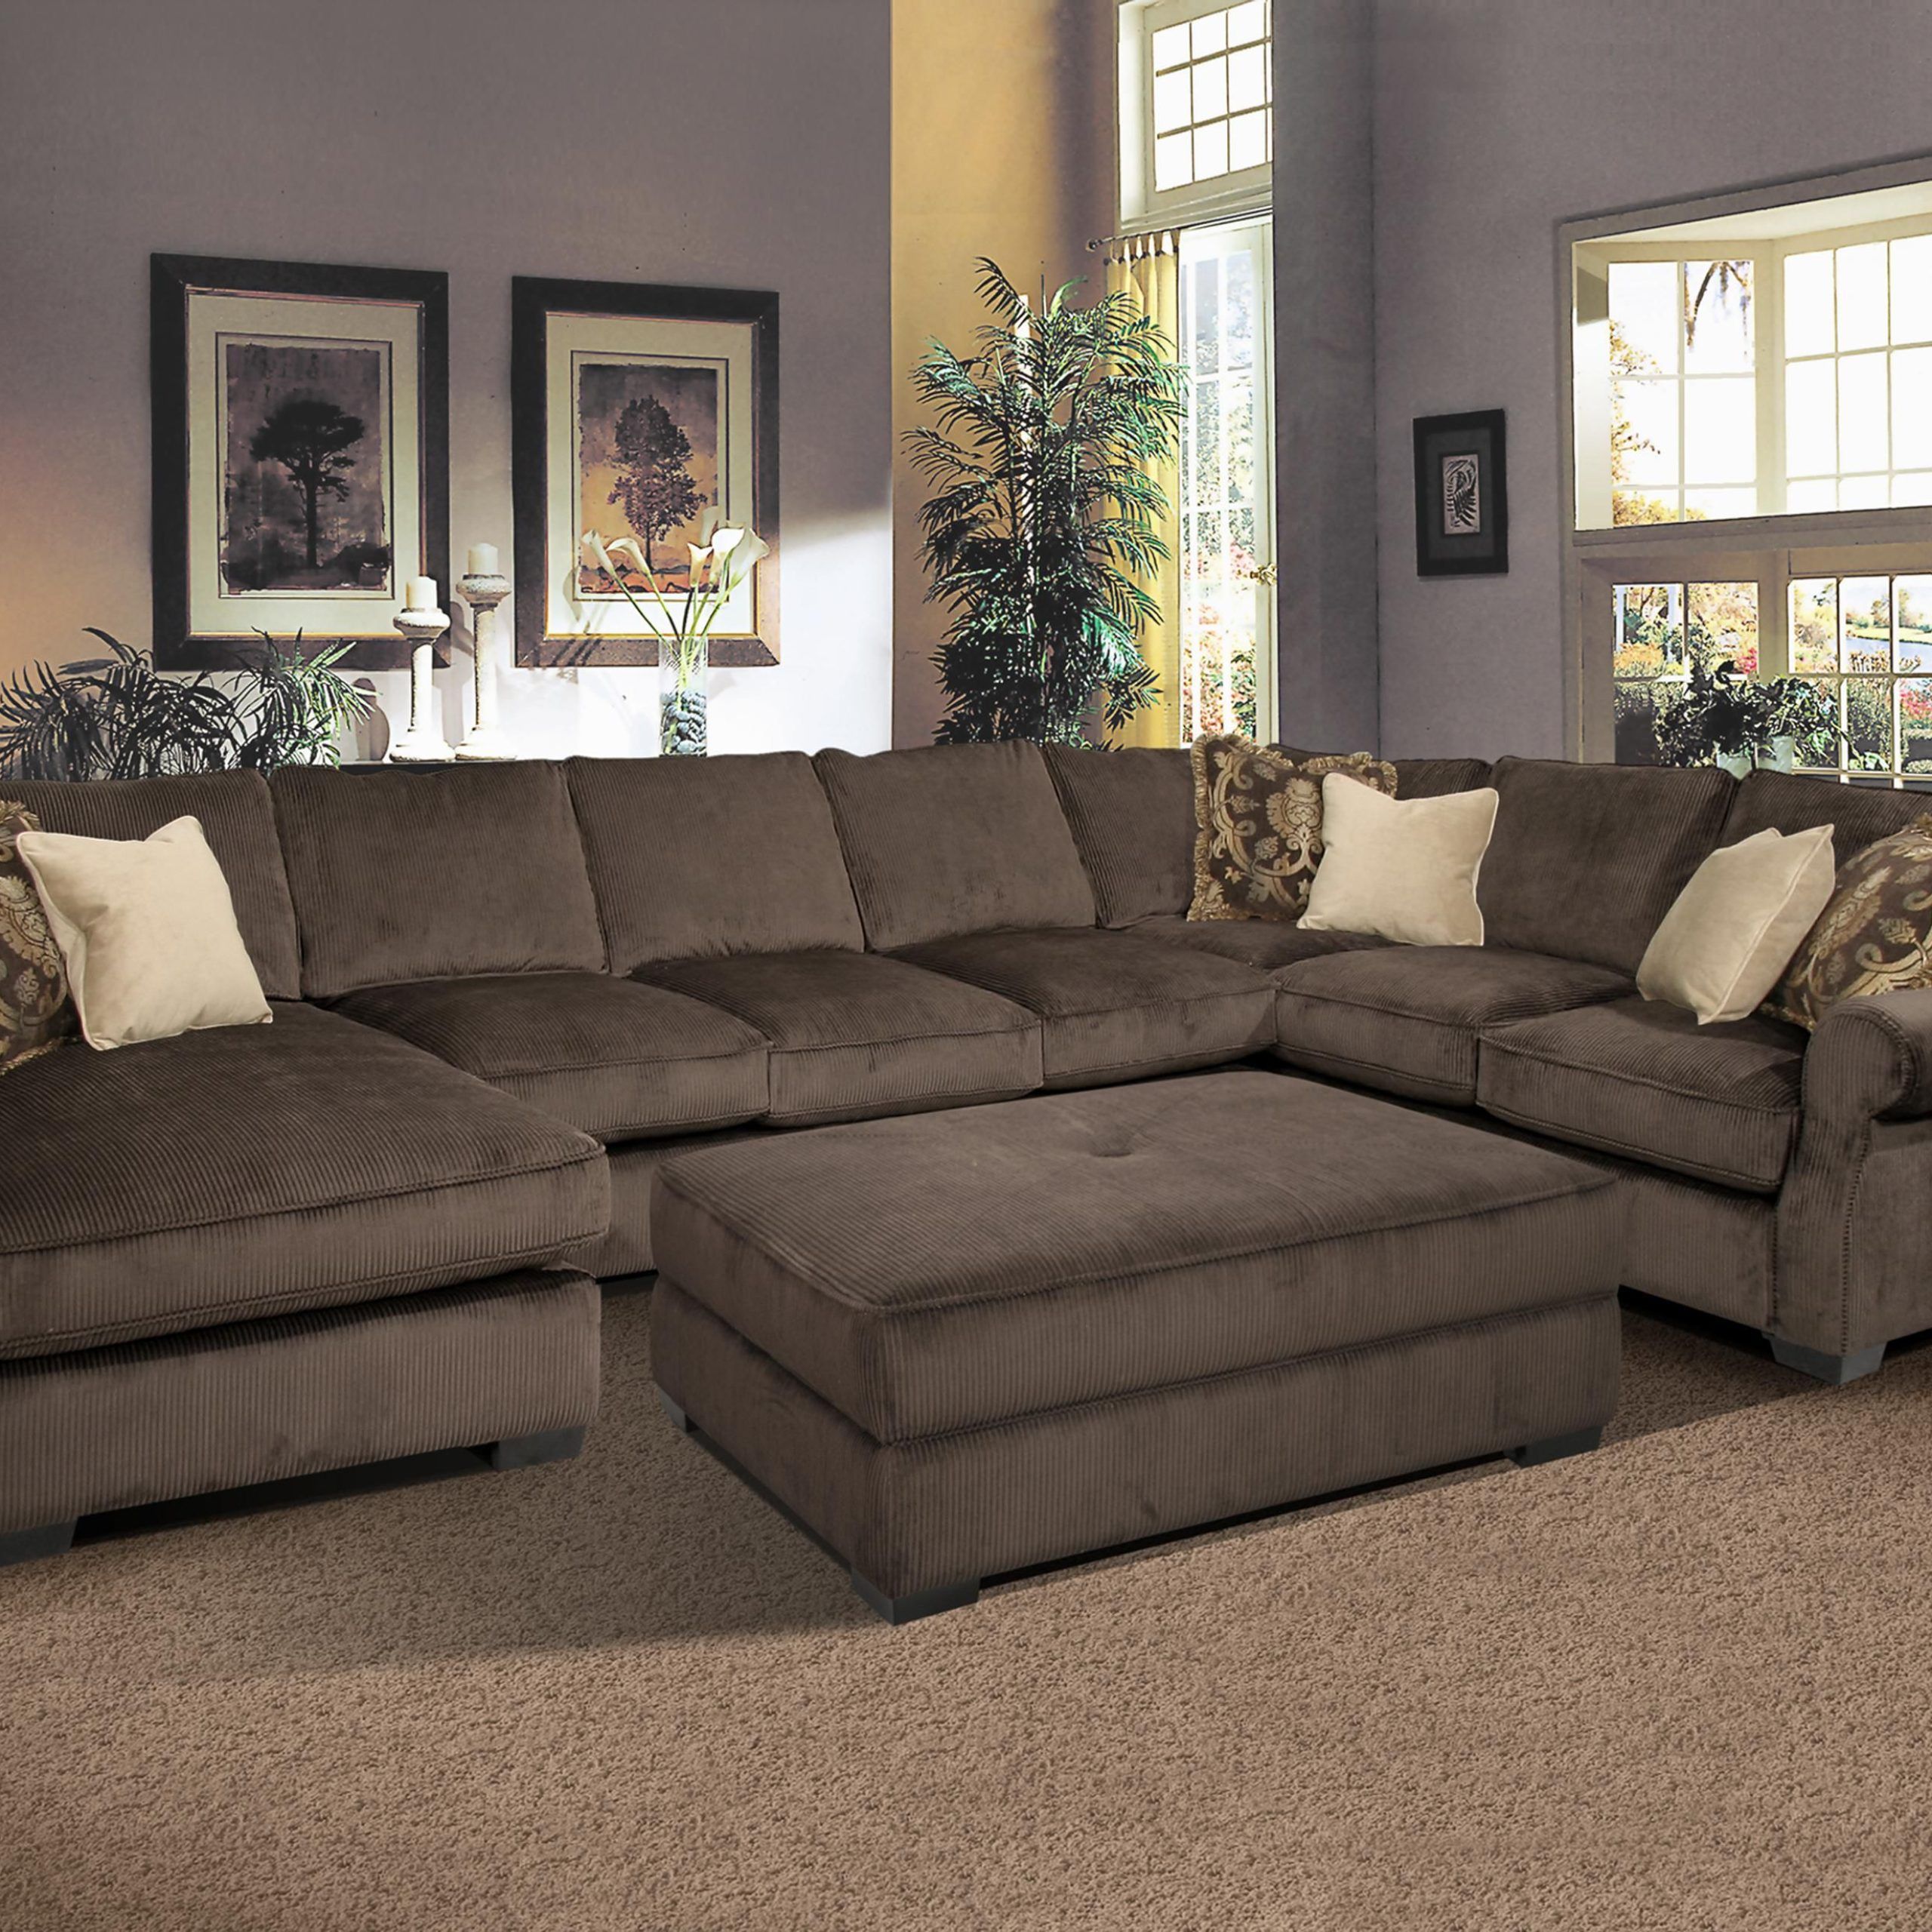 Furniture Elliot Fabric Microfiber 3 Piece Chaise Sectional Sofa With Regard To 104" Sectional Sofas (View 13 of 20)